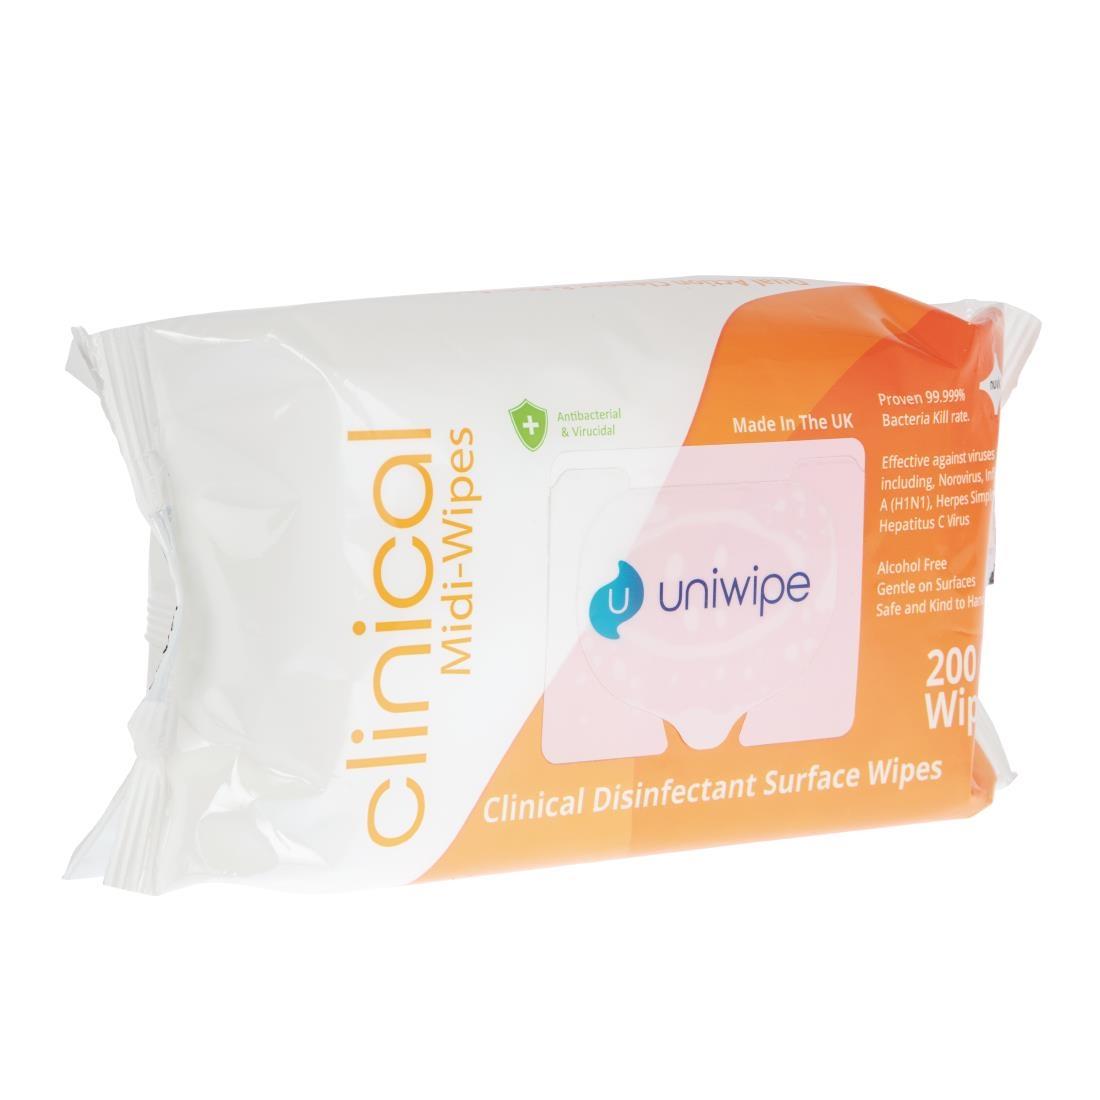 Uniwipe Clinical Disinfectant Surface Wipes (Pack of 200) - DF234  - 2